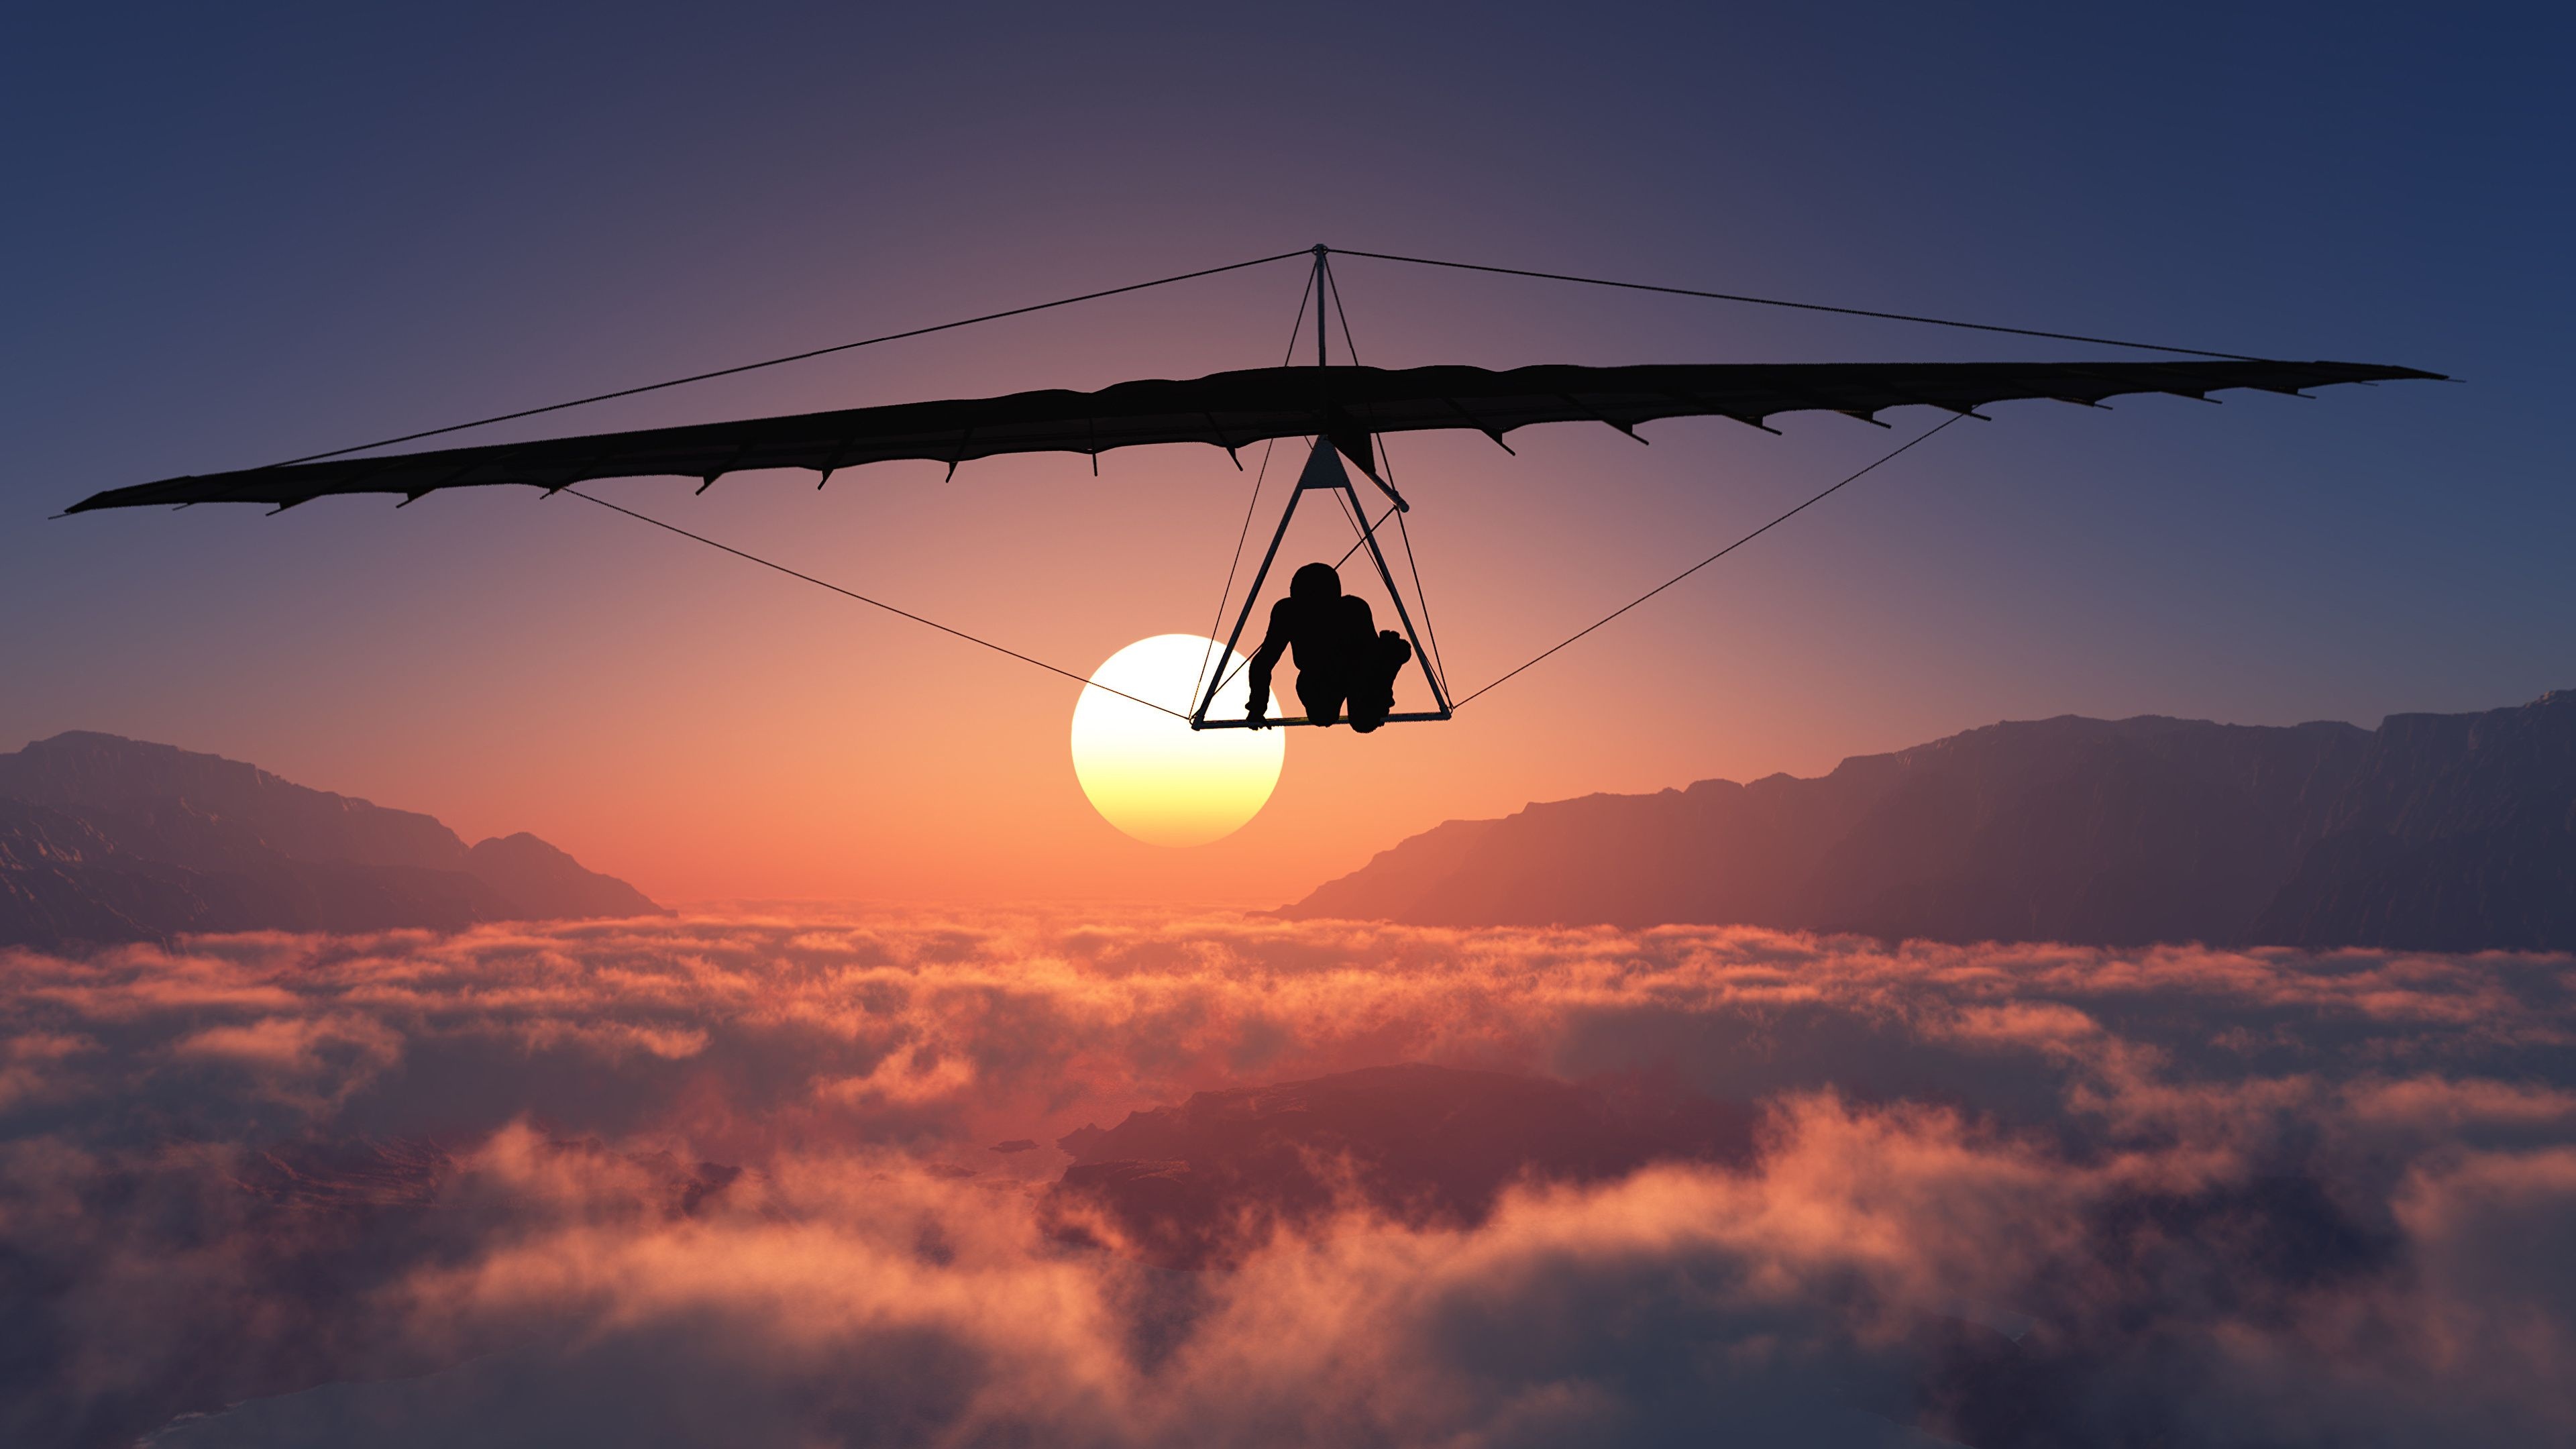 Hang Gliding: Individual hang gliding over the clouds, Sunset, Flying in the sky. 3840x2160 4K Wallpaper.